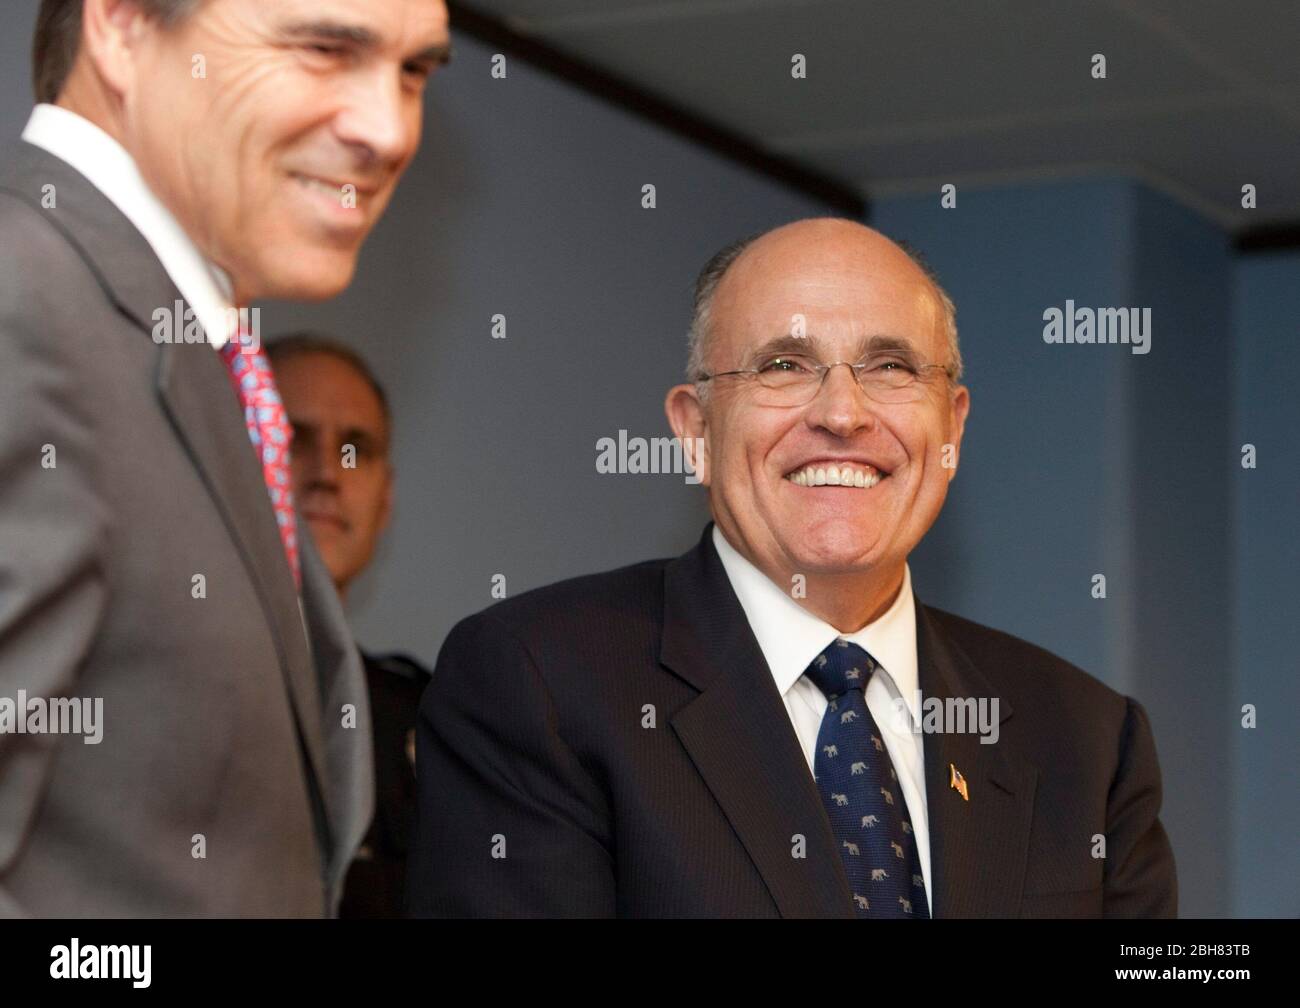 Austin Texas USA, September 15, 2009: Former New York City Mayor Rudy Giuliani (r) joins Texas Gov. Rick Perry at a press conference denouncing what they say is federal government inaction on border immigration issues that affect Texas as well as the rest of the United States. Perry and Giuliani are touring the state in a series of political fund-raisers. ©Bob Daemmrich Stock Photo